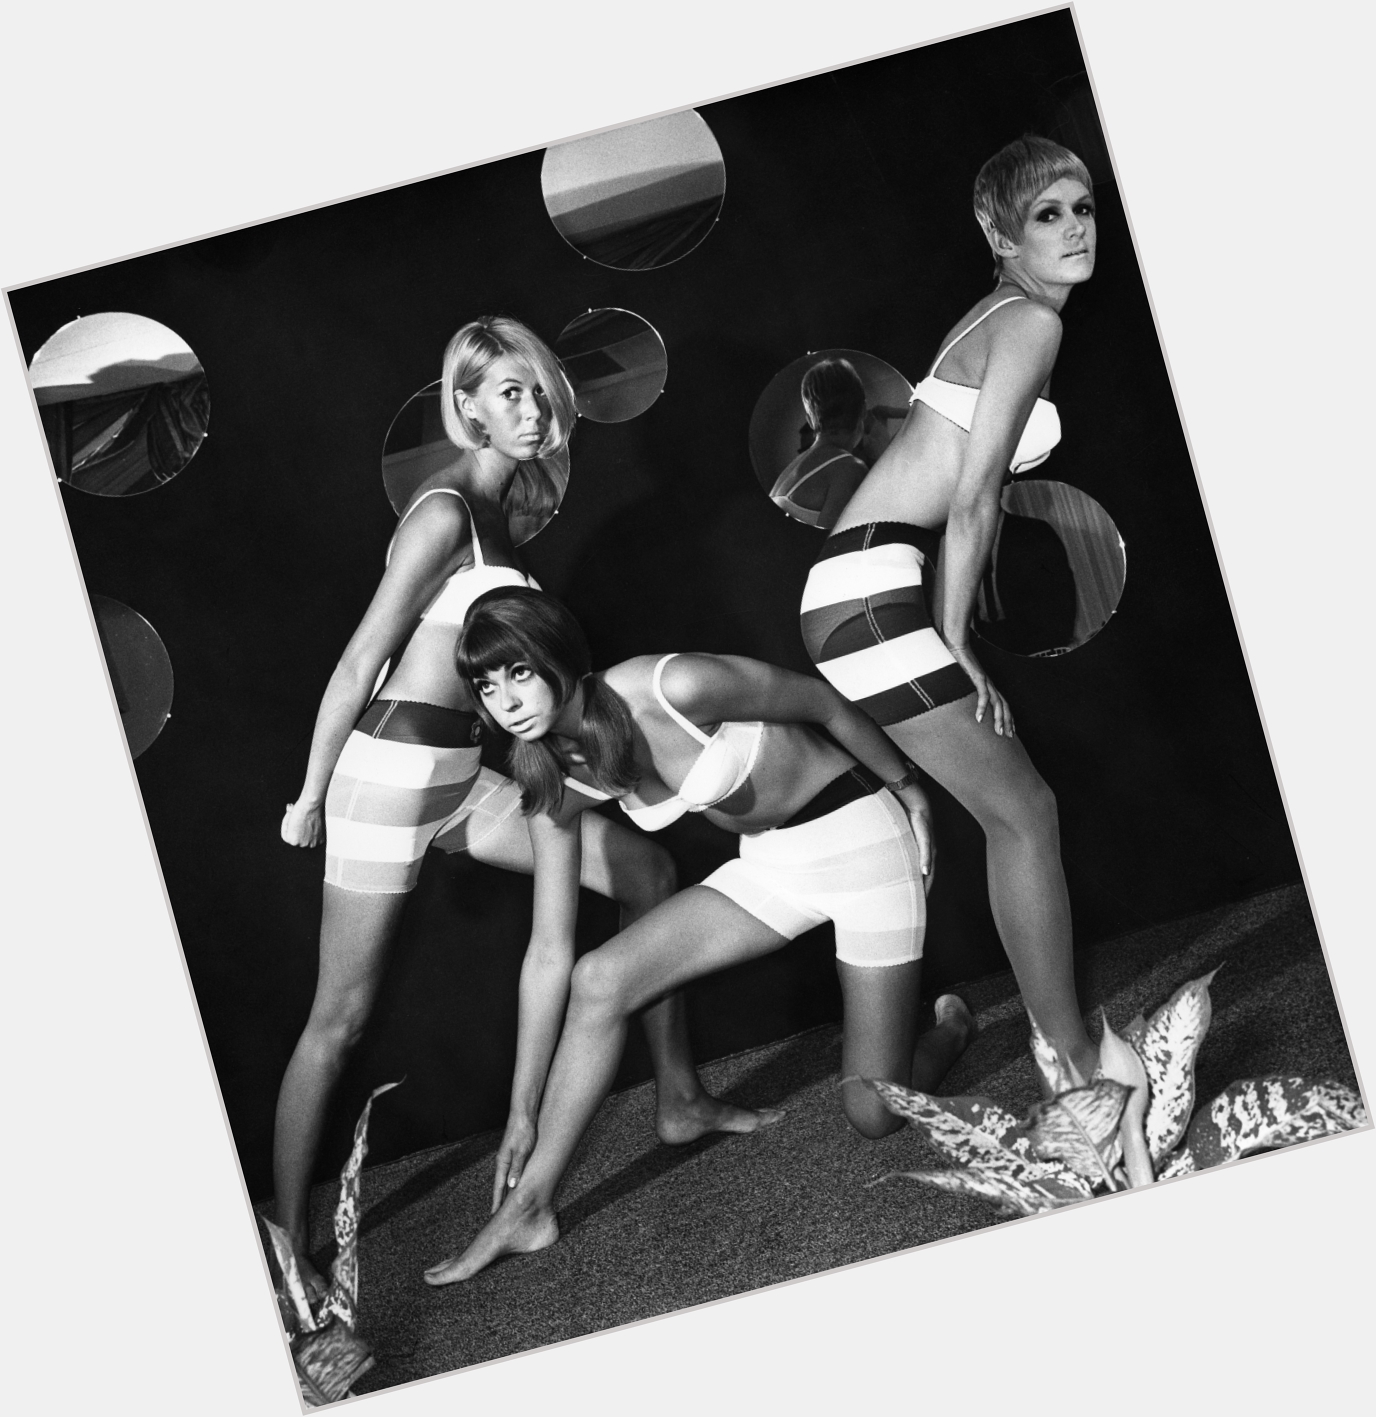 Http://fanpagepress.net/m/M/Mary Quant Exclusive Hot Pic 5